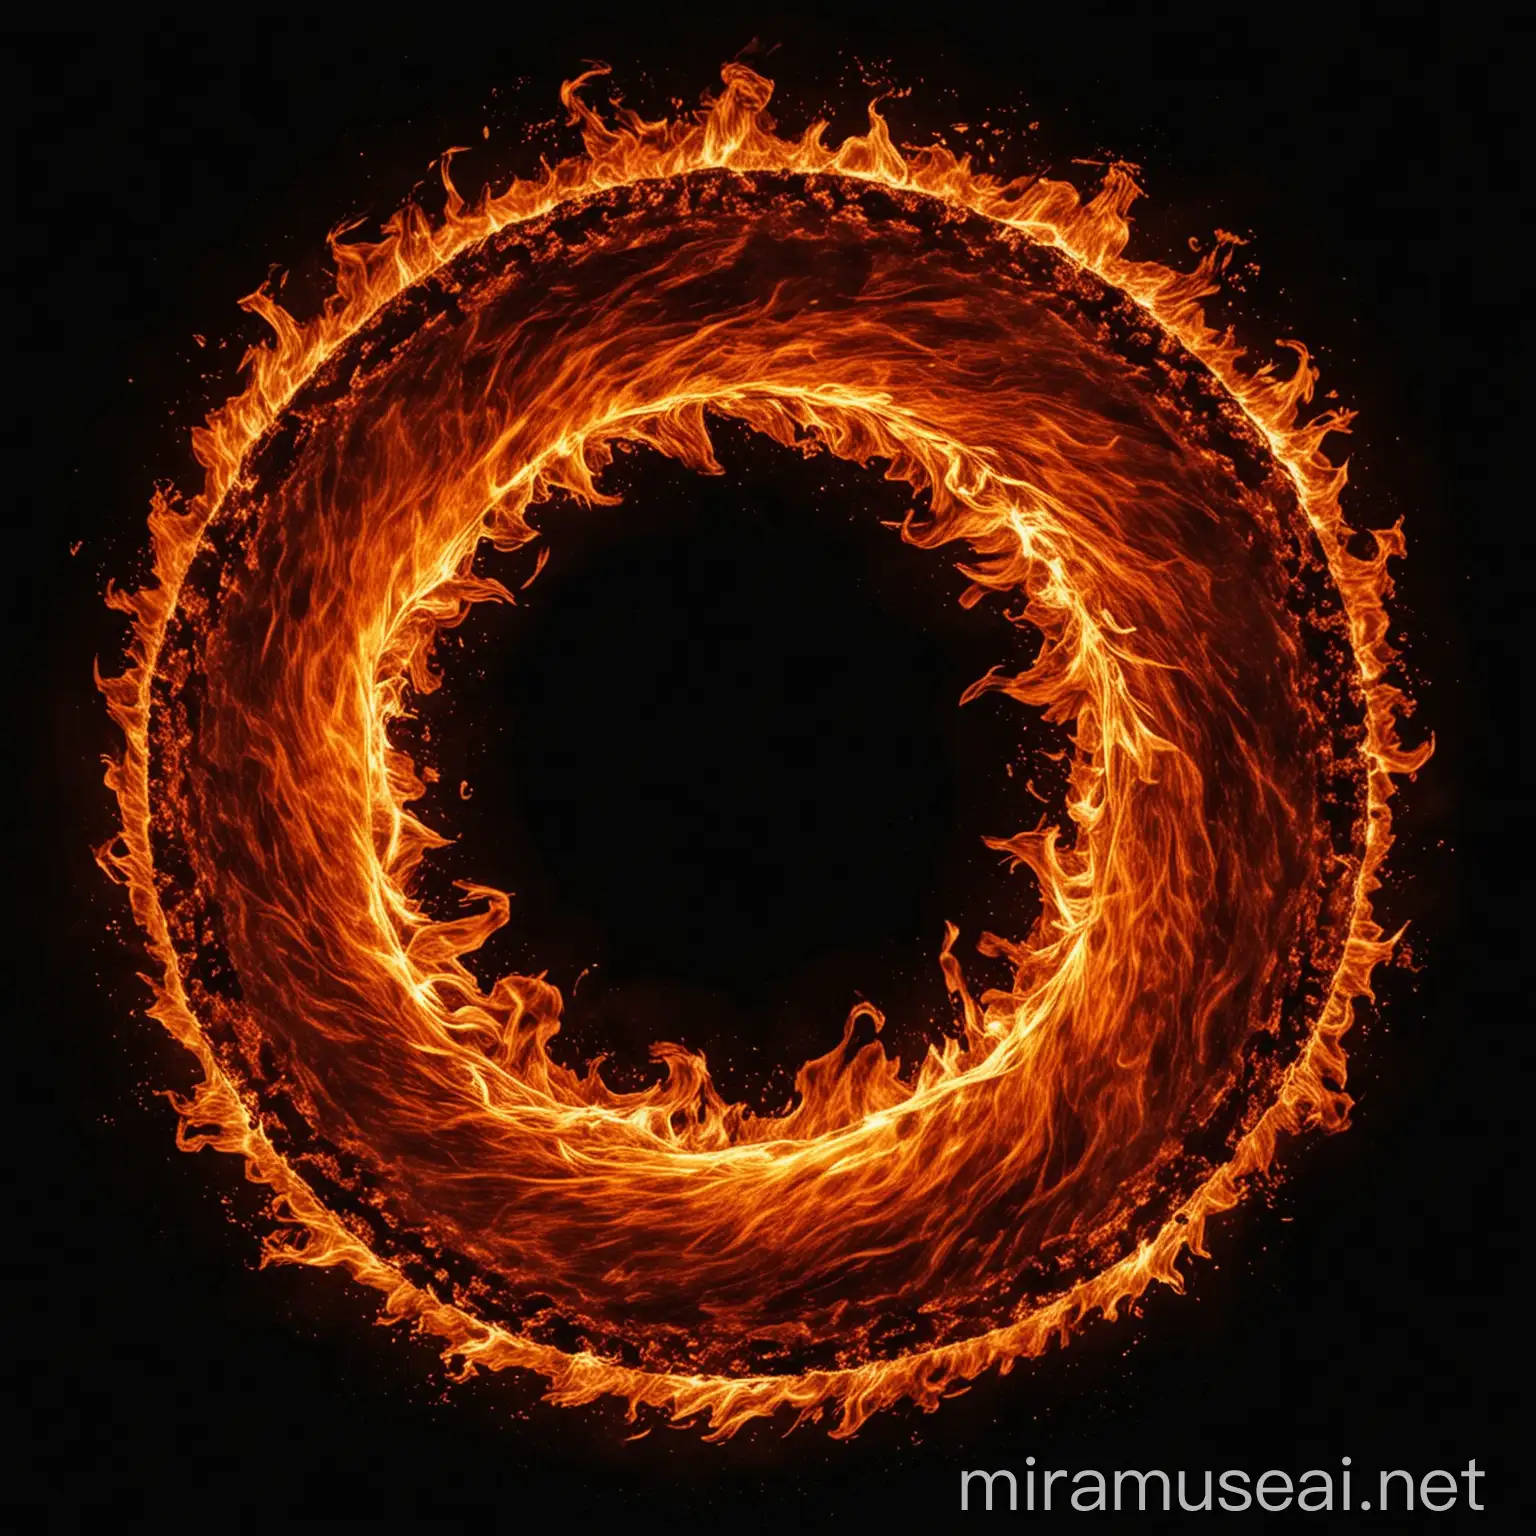 Enigmatic Circle of Fire on Black Background